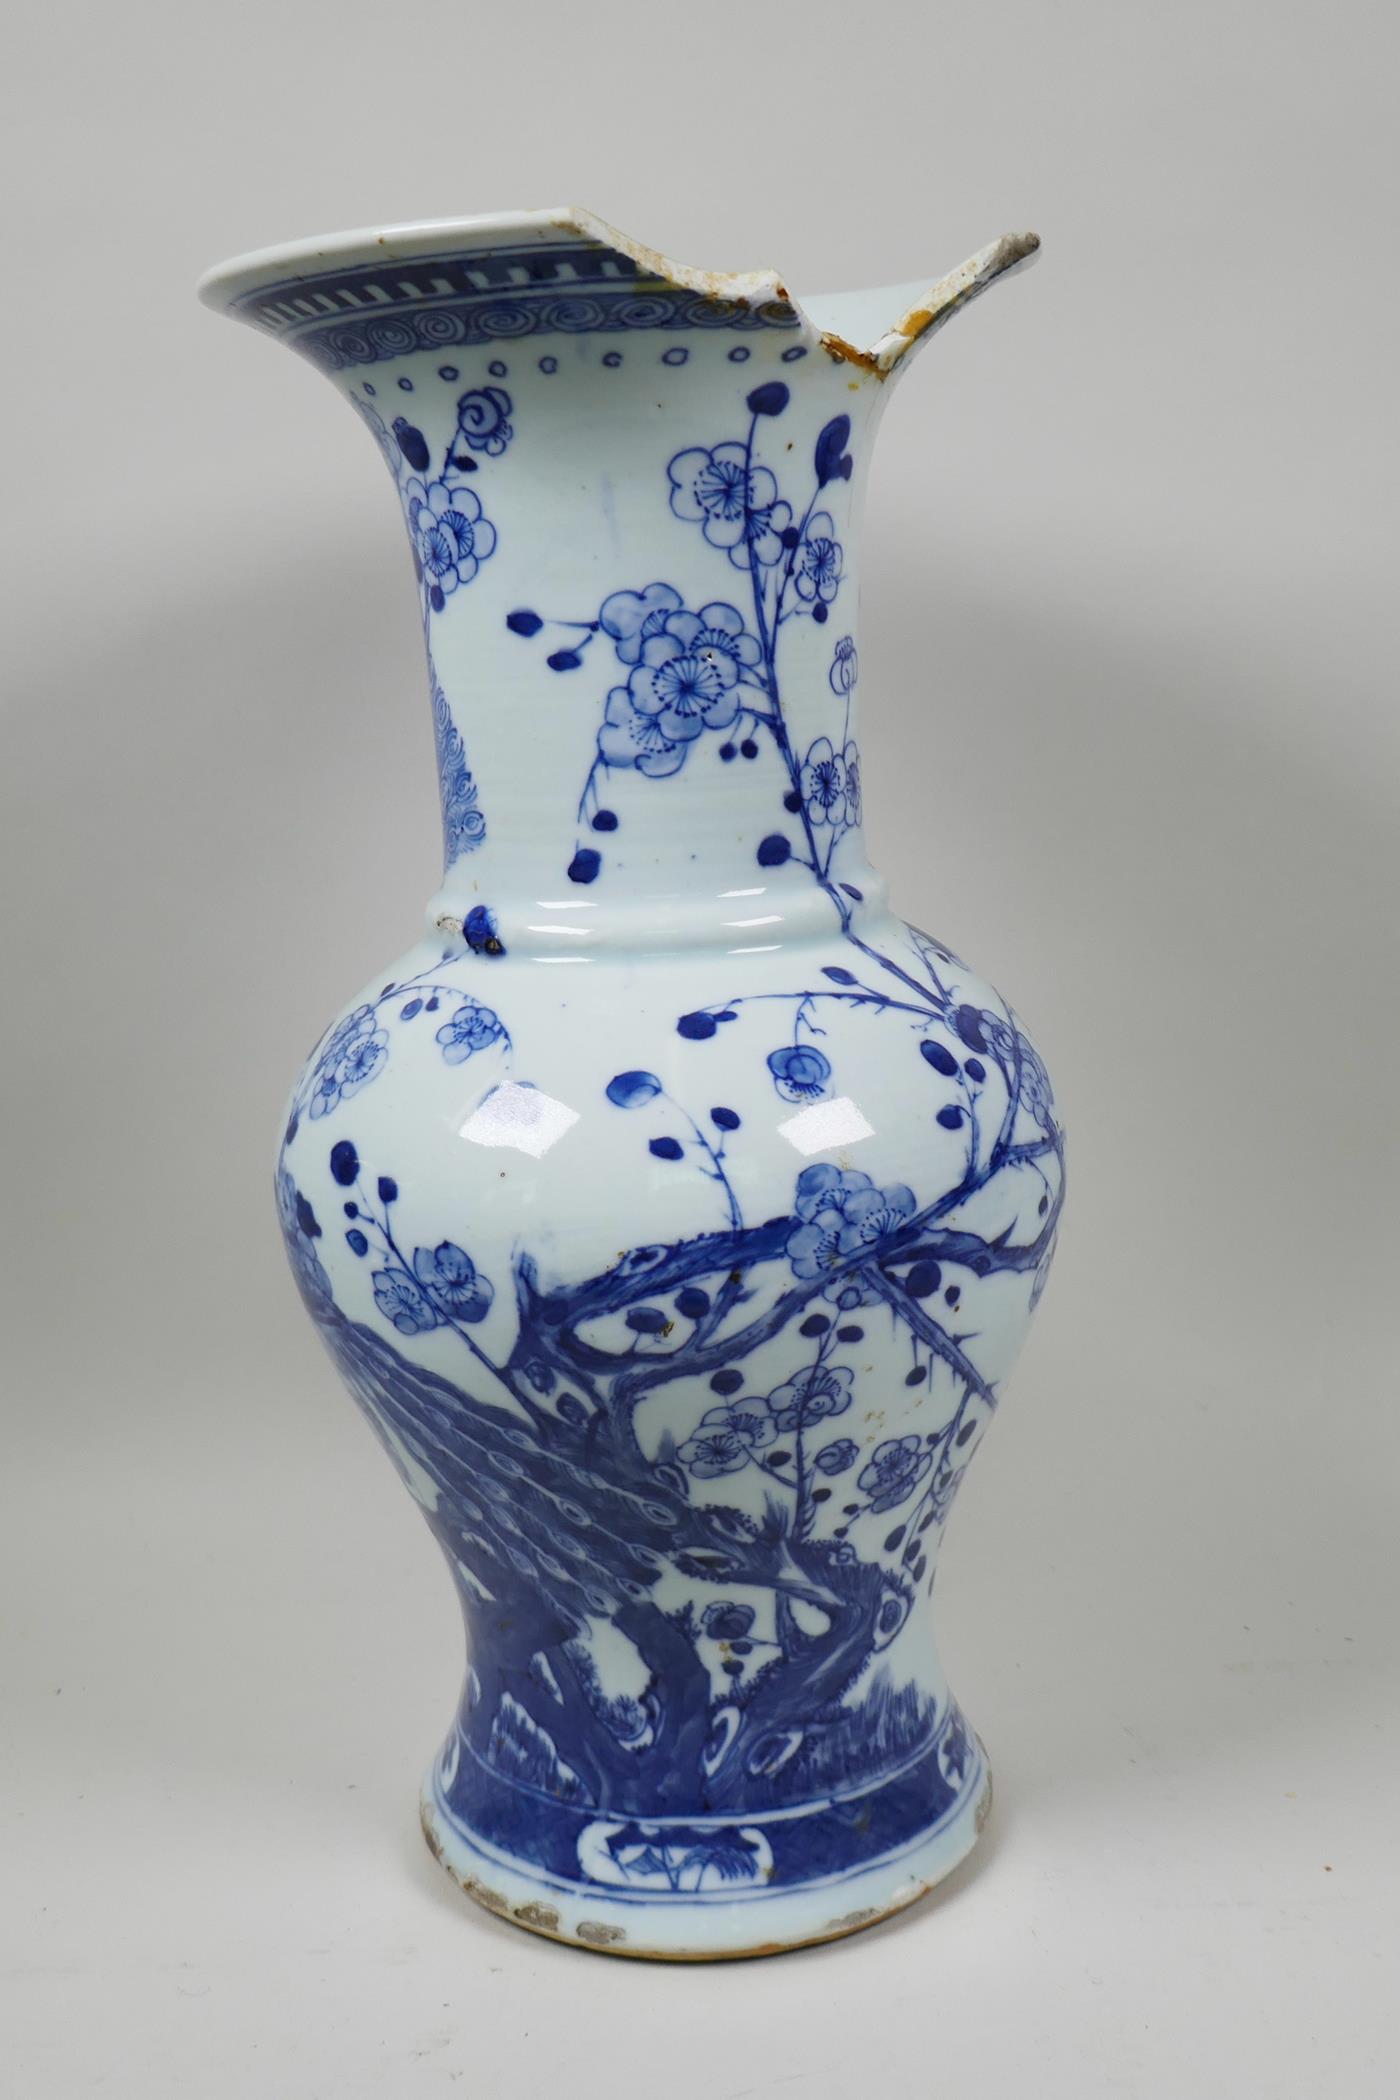 A C19th Chinese blue and white porcelain vase decorated with peacocks and prunus blossom, 14" - Image 2 of 7